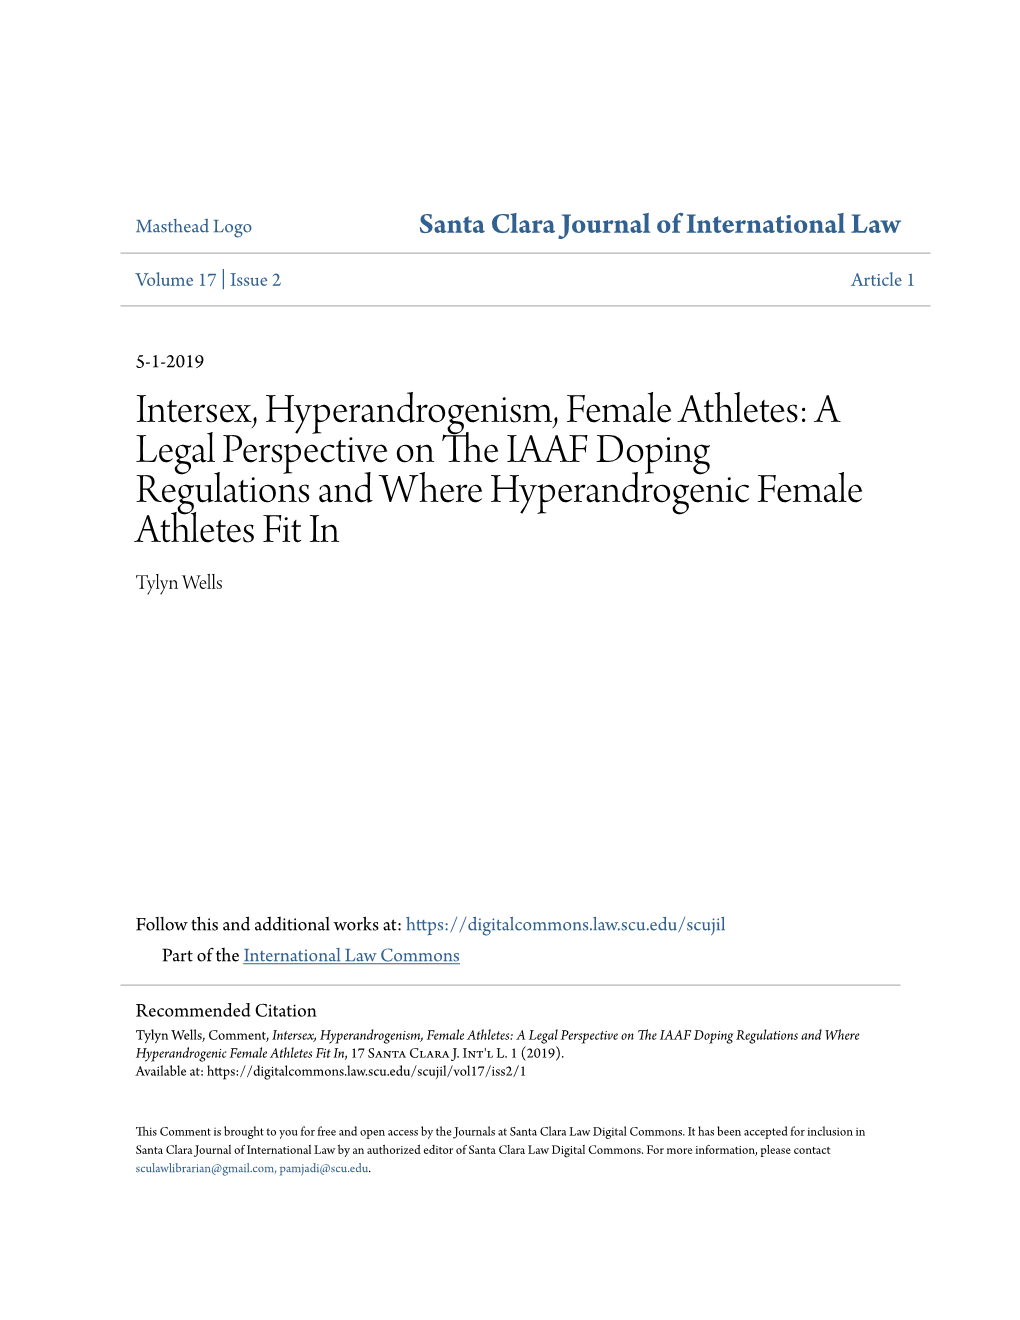 Intersex, Hyperandrogenism, Female Athletes: a Legal Perspective on the IAAF Doping Regulations and Where Hyperandrogenic Female Athletes Fit in Tylyn Wells